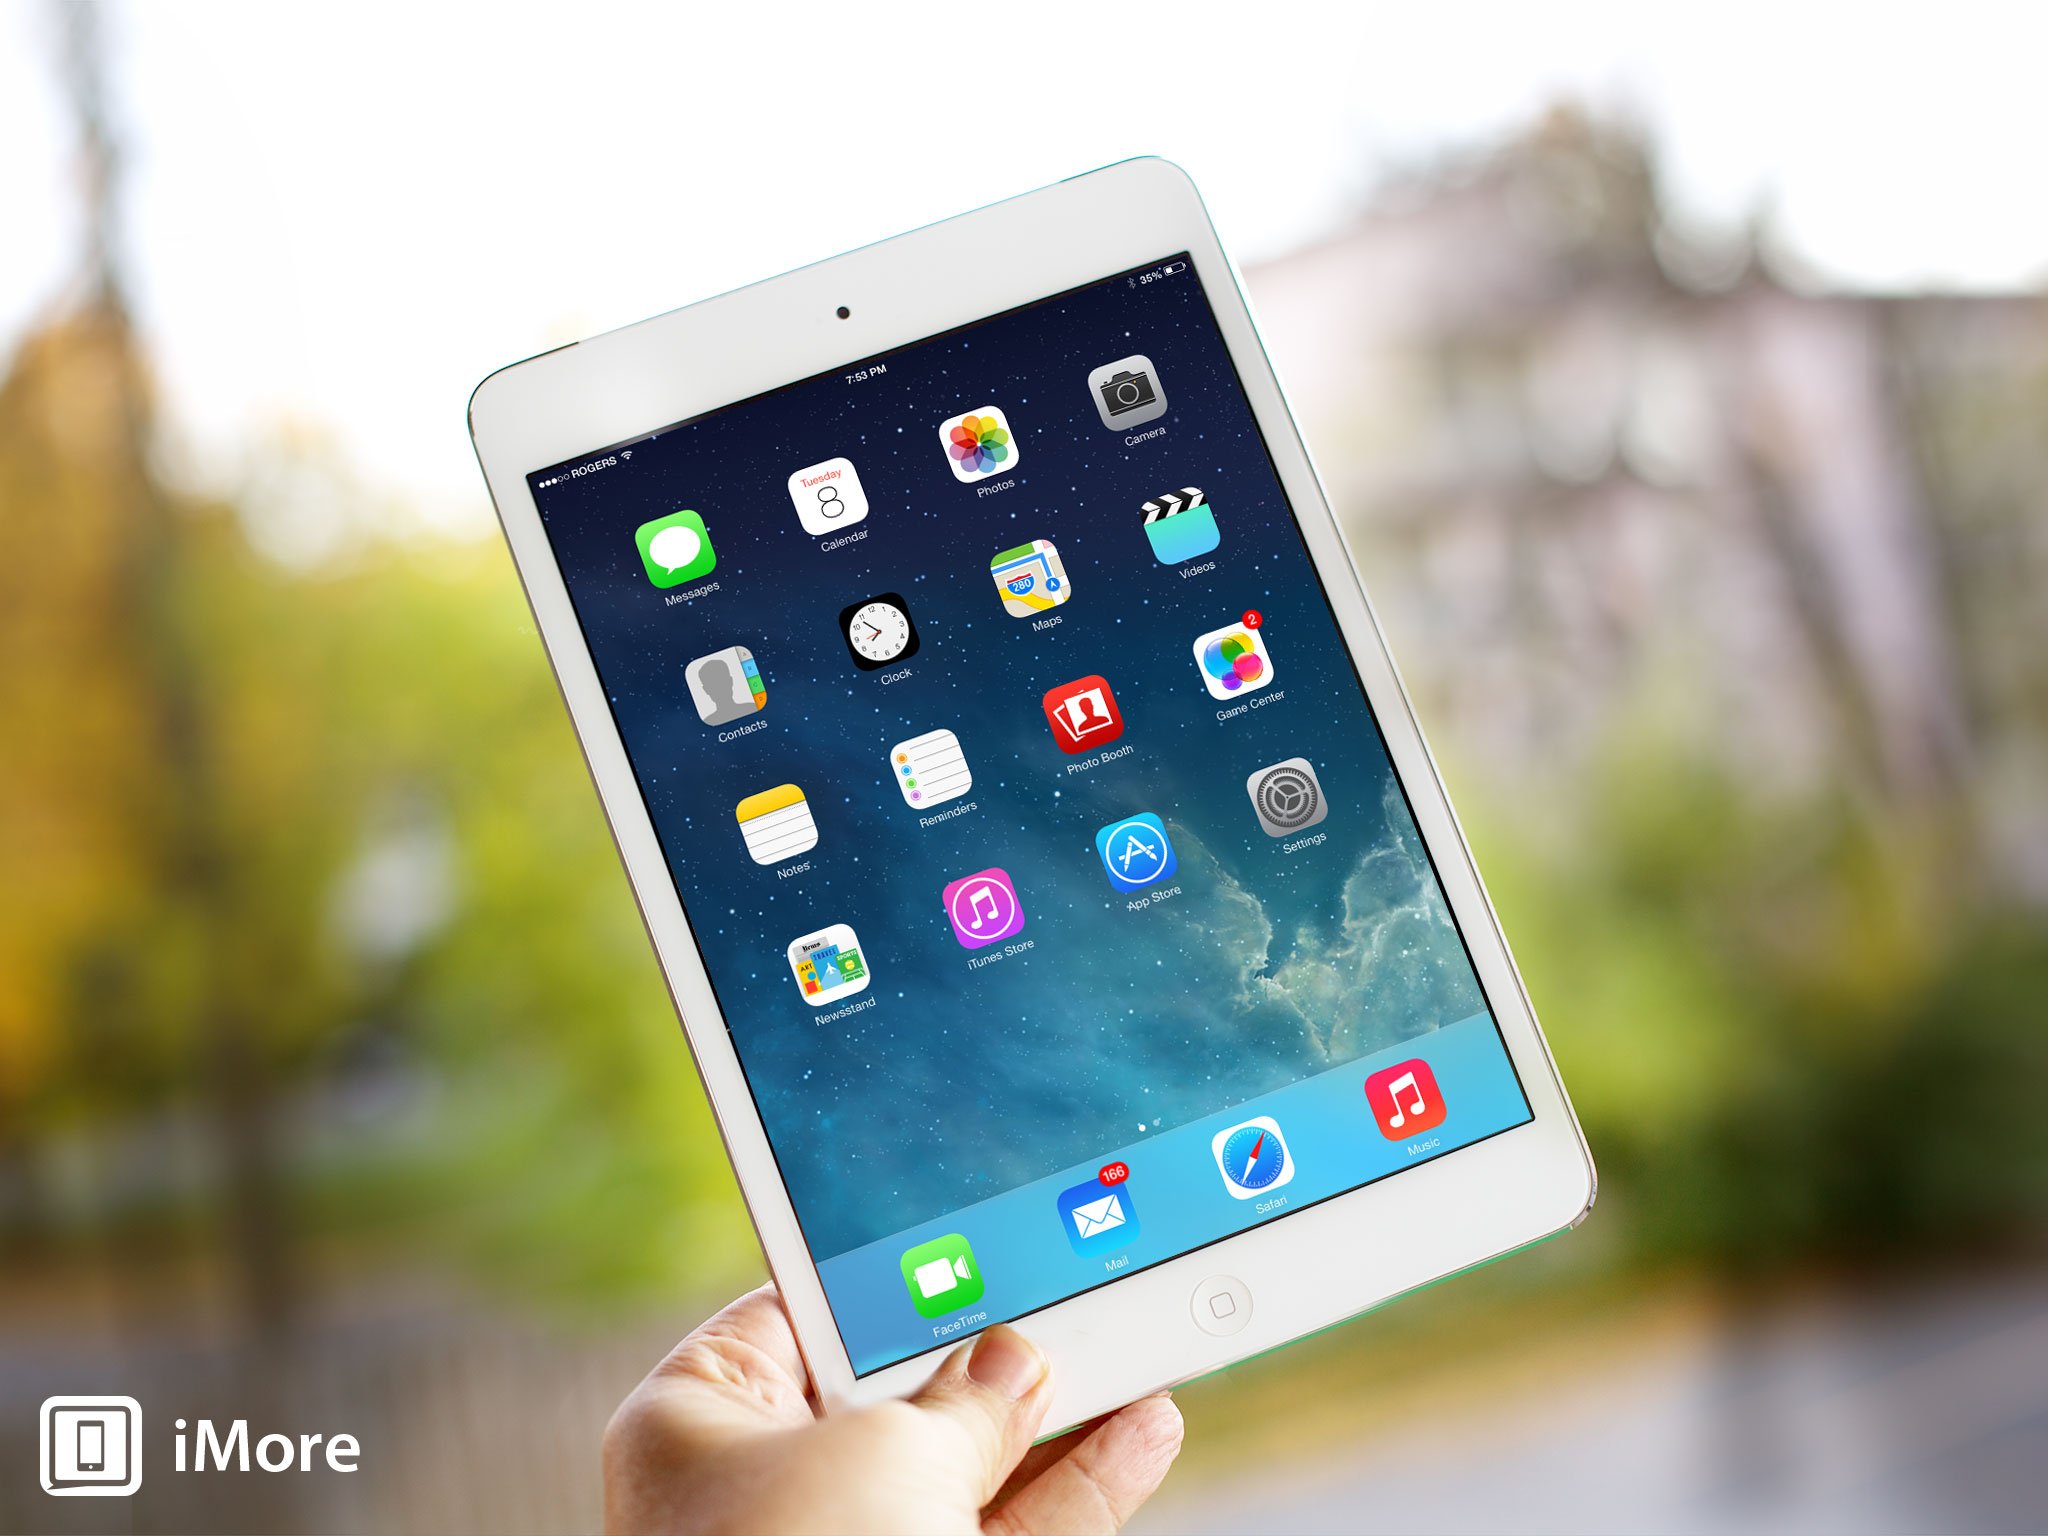 Everything you need to know about Apple's fifth-generation iPad Air, with new design and Apple A7 processor